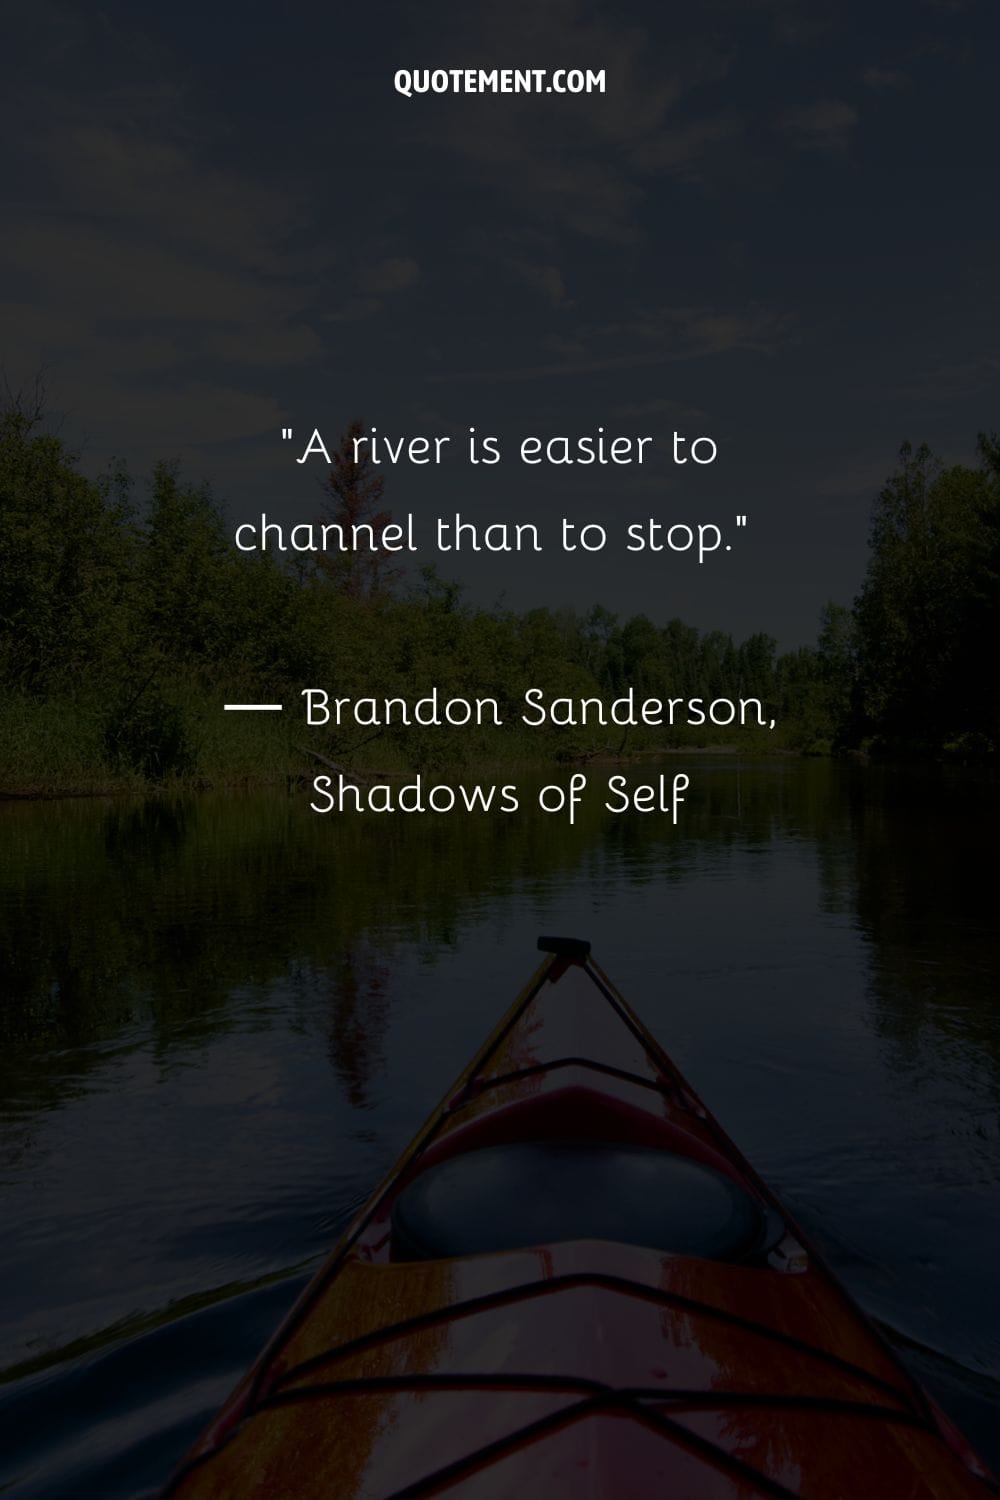 River expedition in a tranquil canoe representing river quote on inspiration